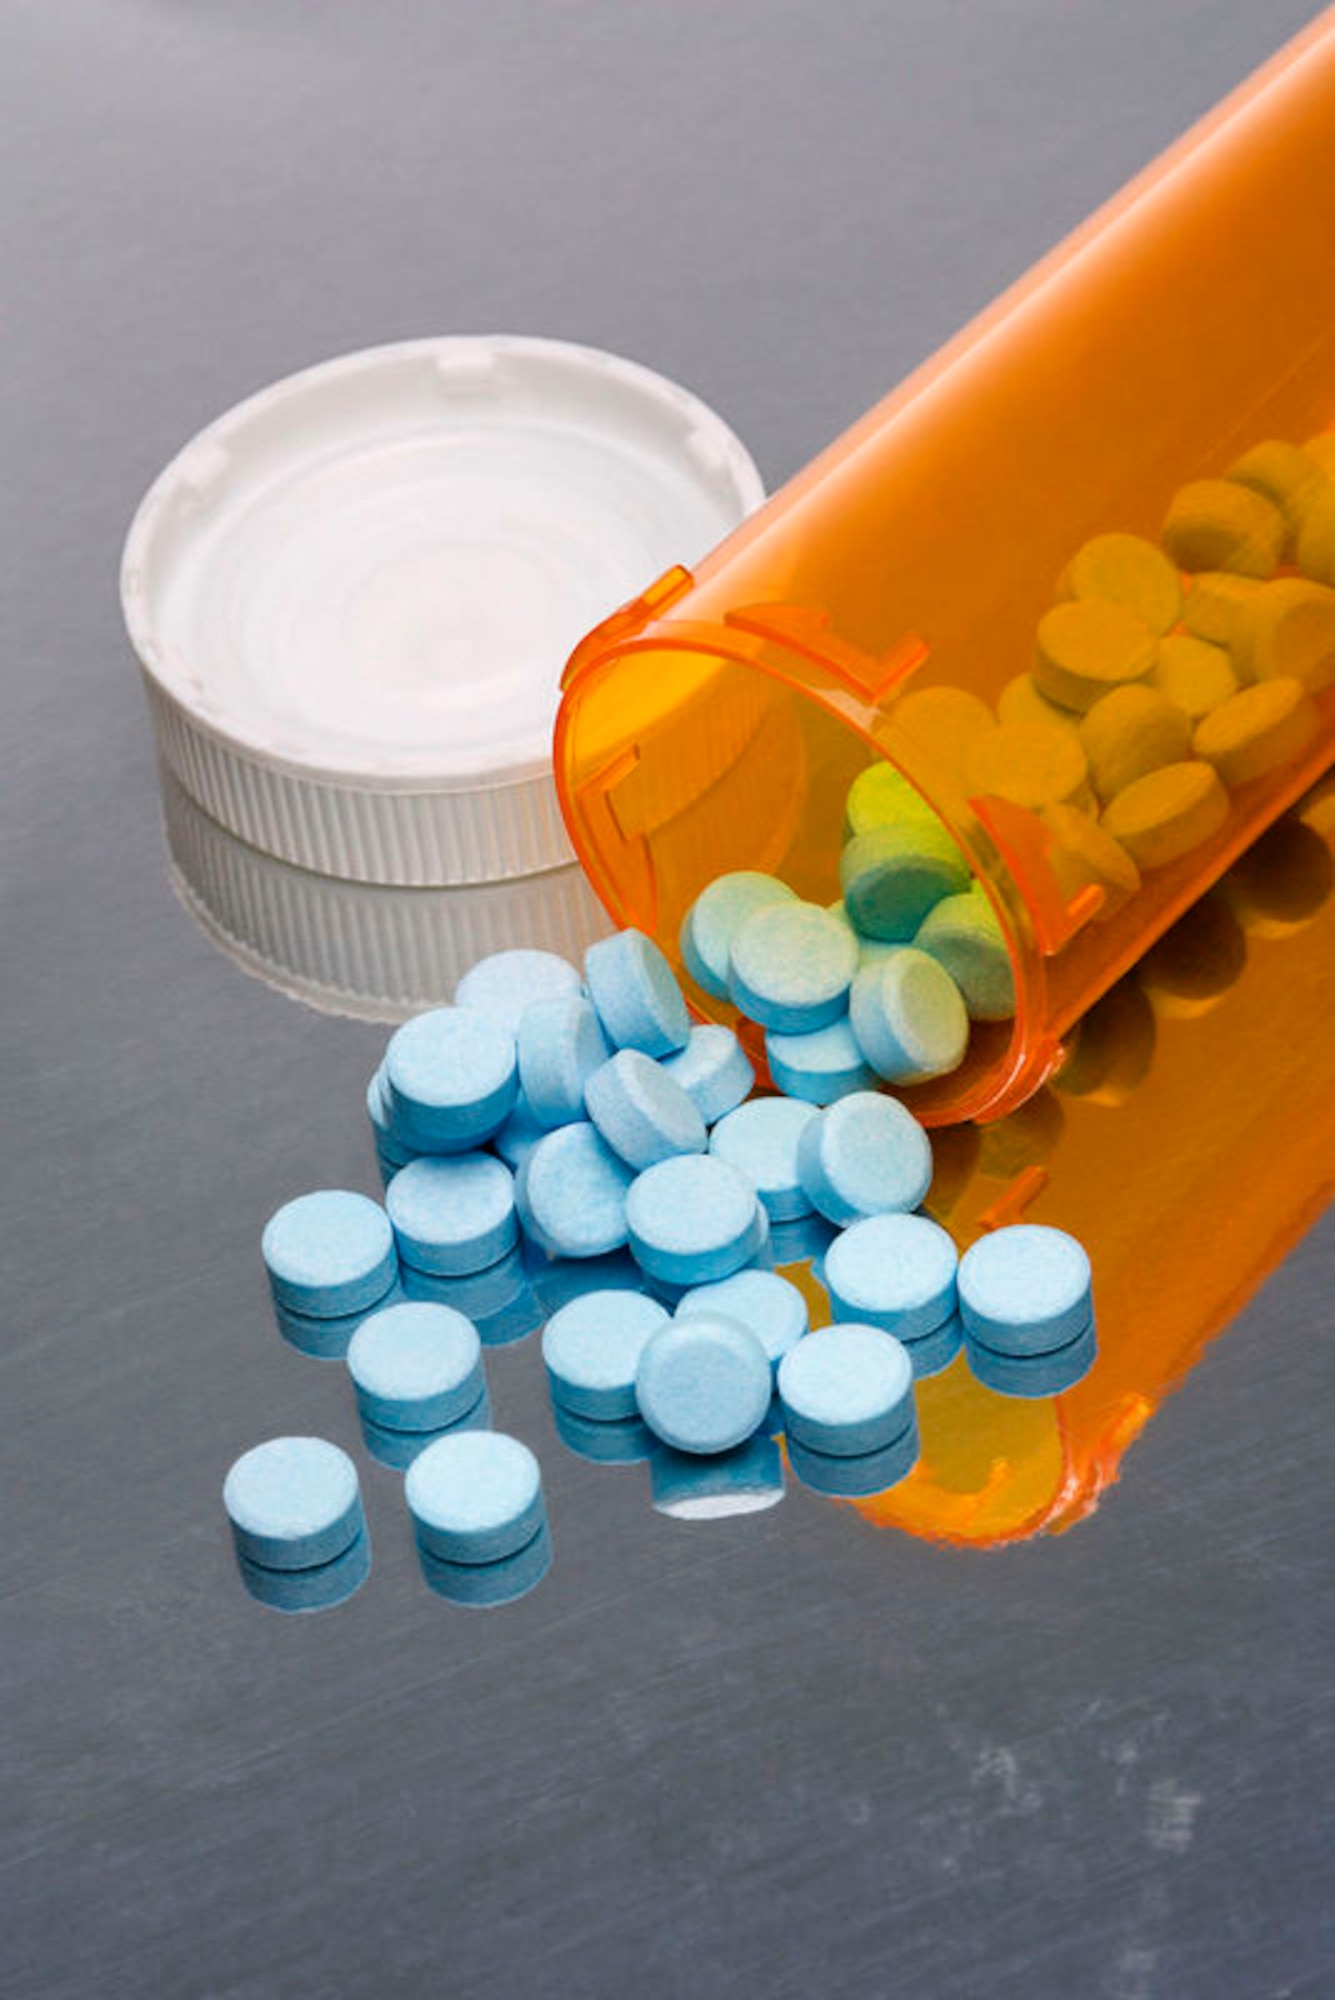 Generic drugs provide the same benefits as their brand-name counterparts but at a lower price.  (File photo)